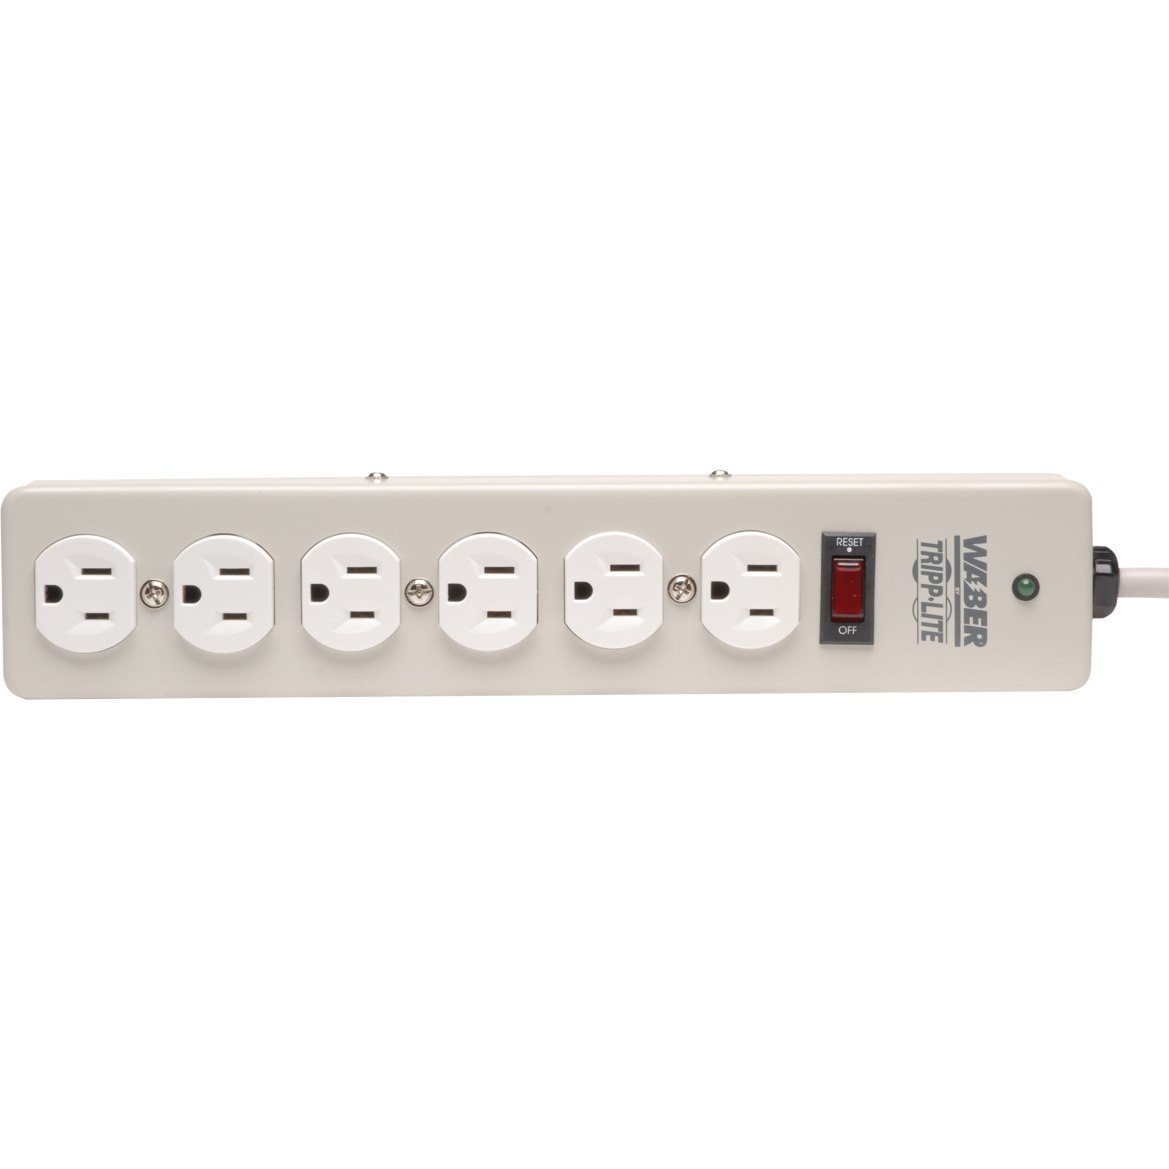 Tripp Lite by Eaton Industrial Surge Protector, 6-Outlet, 6 ft. (1.8 m) Cord, 2100 Joules